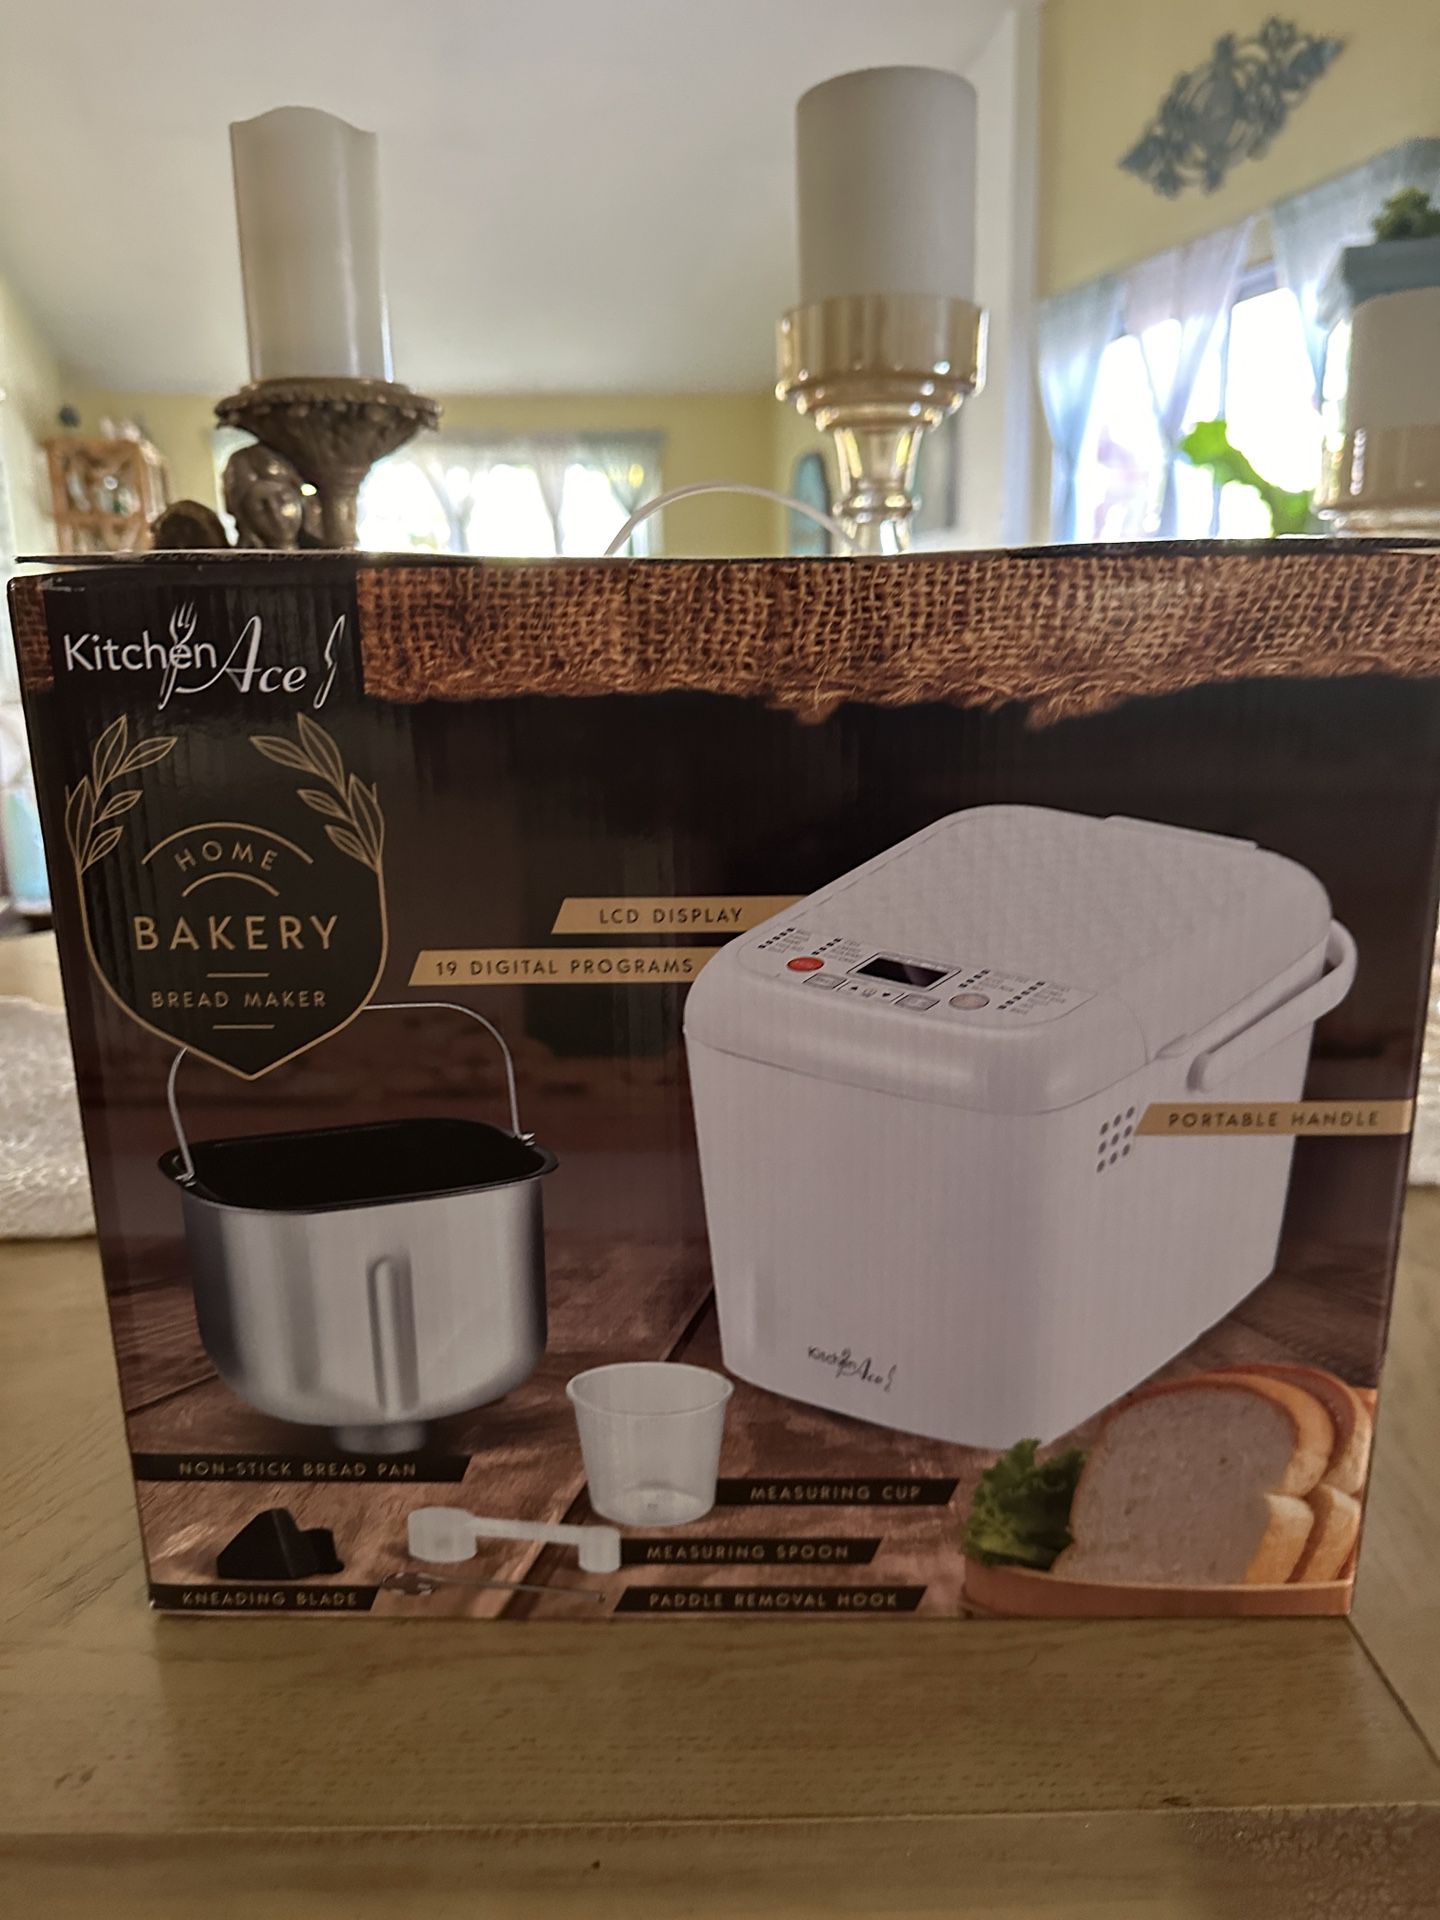 Kitchen Ace Home Bakery Bread Maker Brand New . 19 Digital Timers Small And Large Loaves 